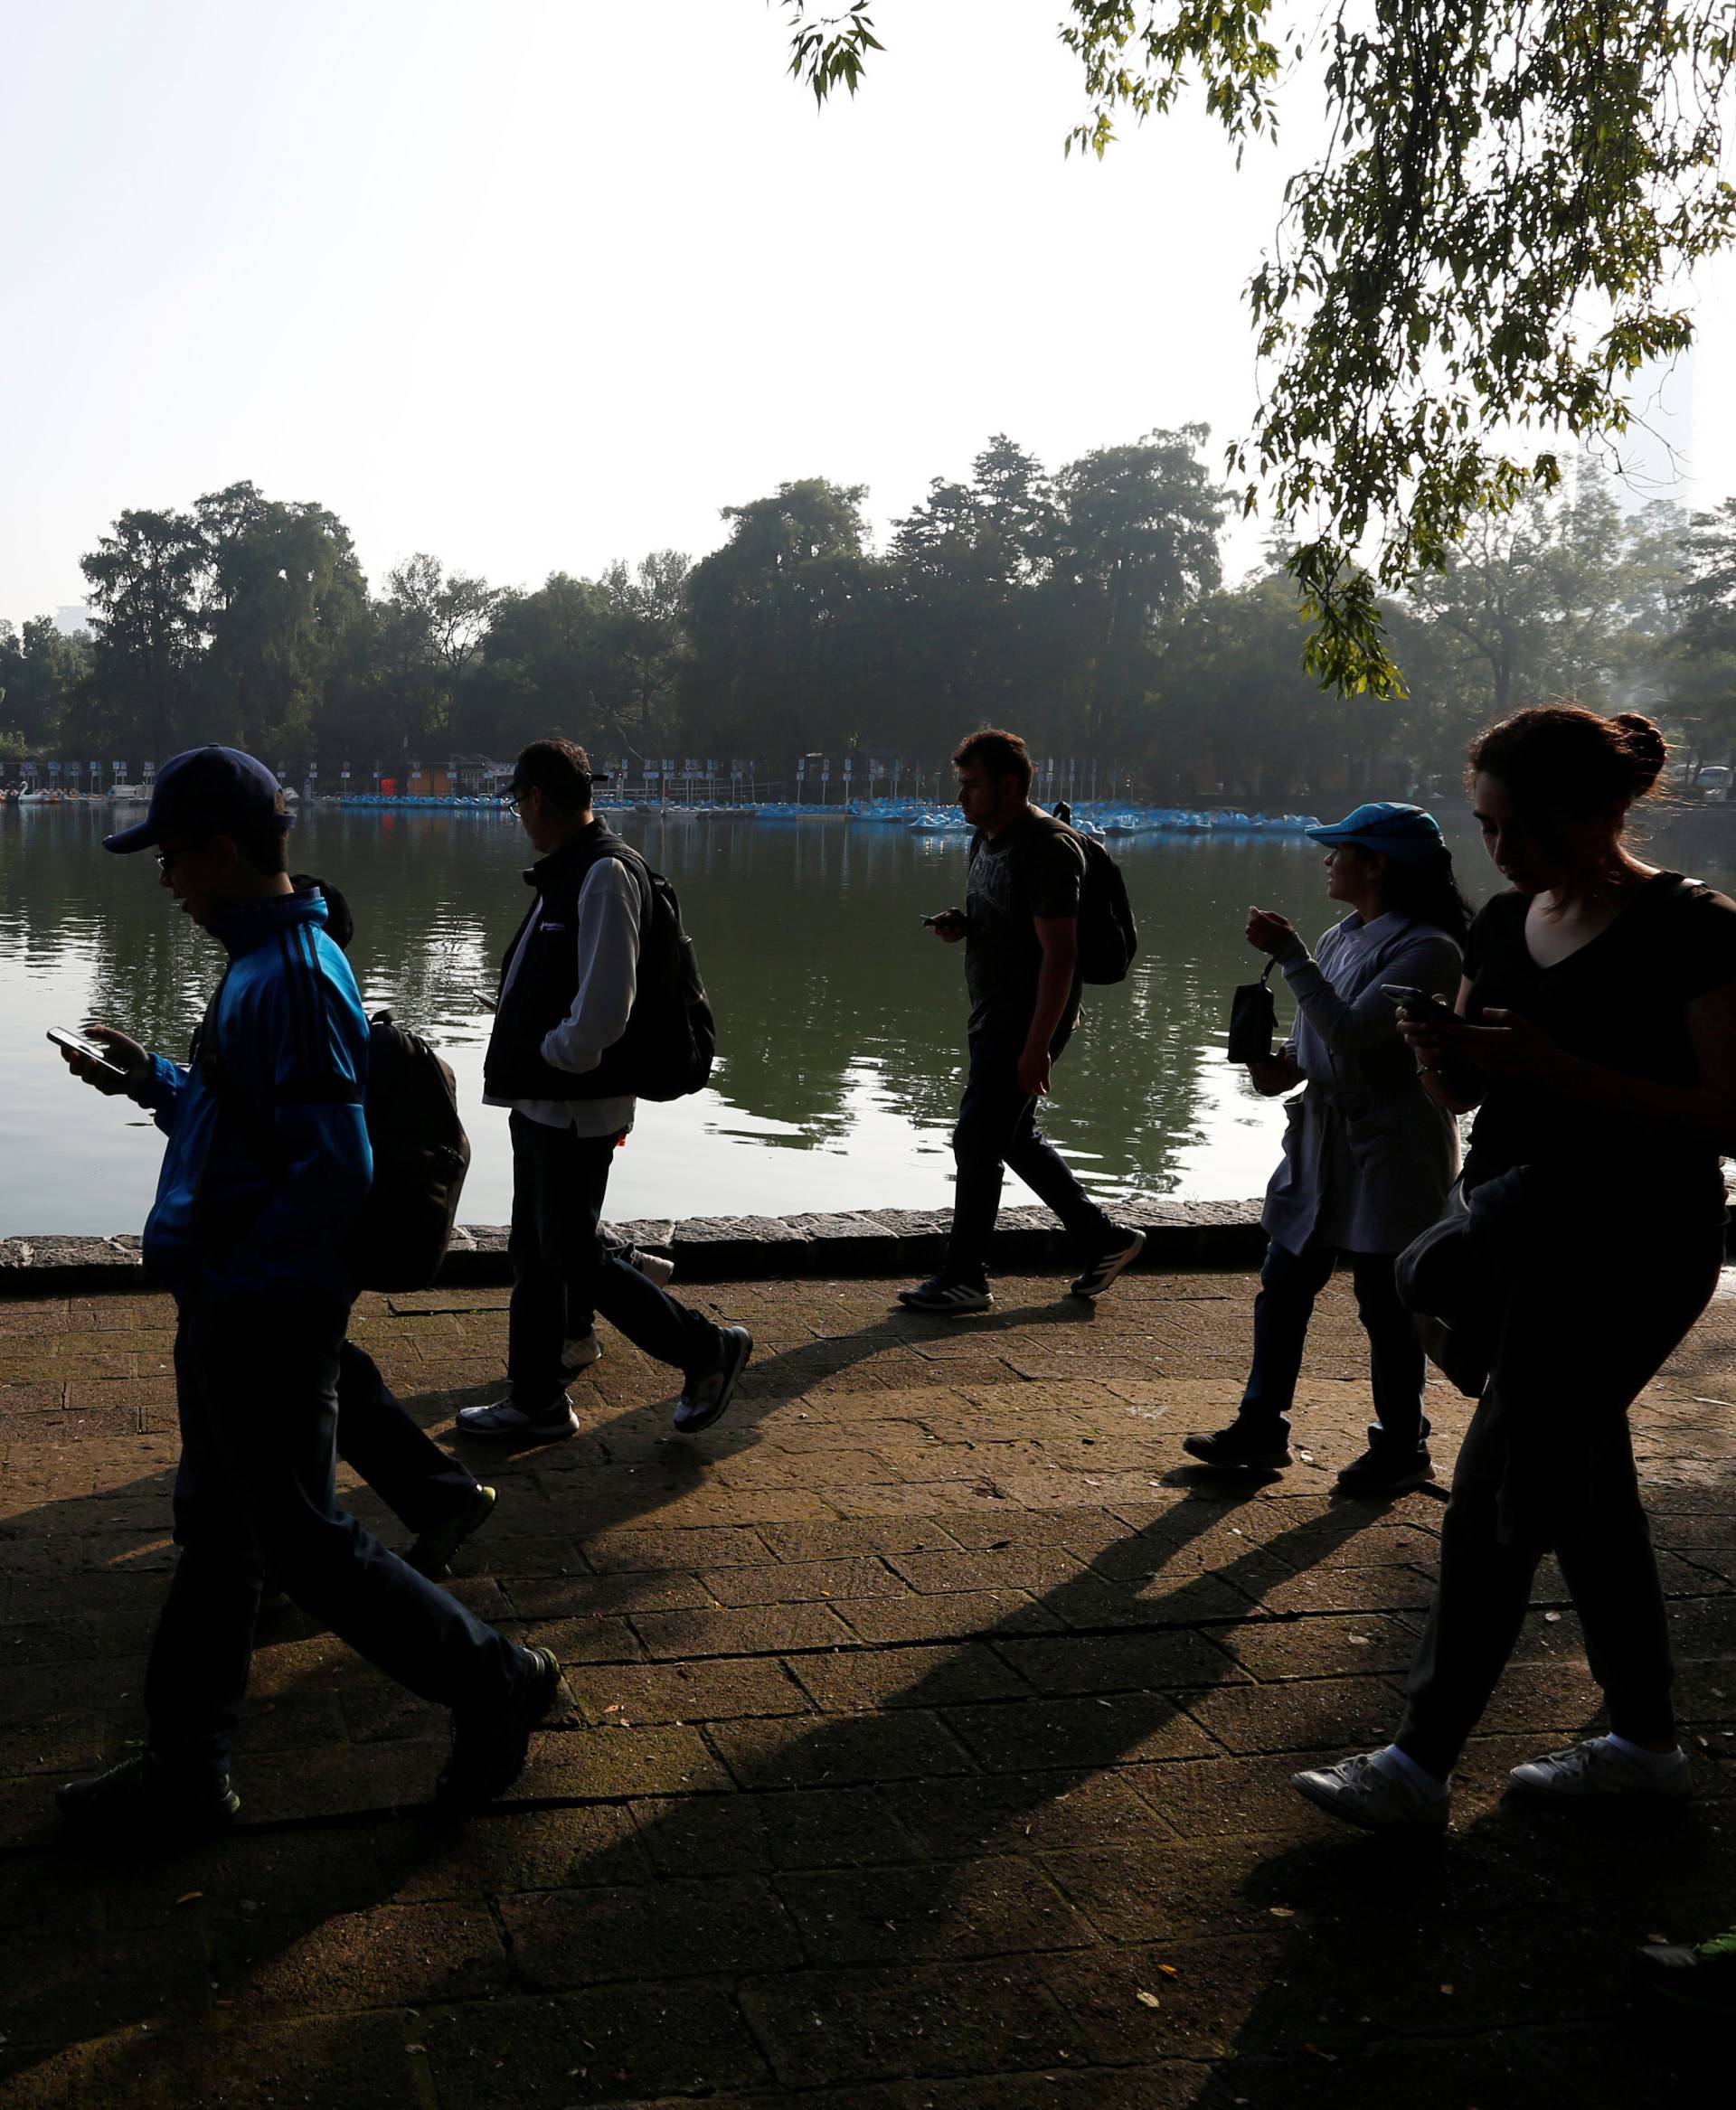 People walk with their mobile phones as some play Pokemon Go during a gathering to celebrate "Pokemon Day" at Chapultepec park in Mexico City, Mexico